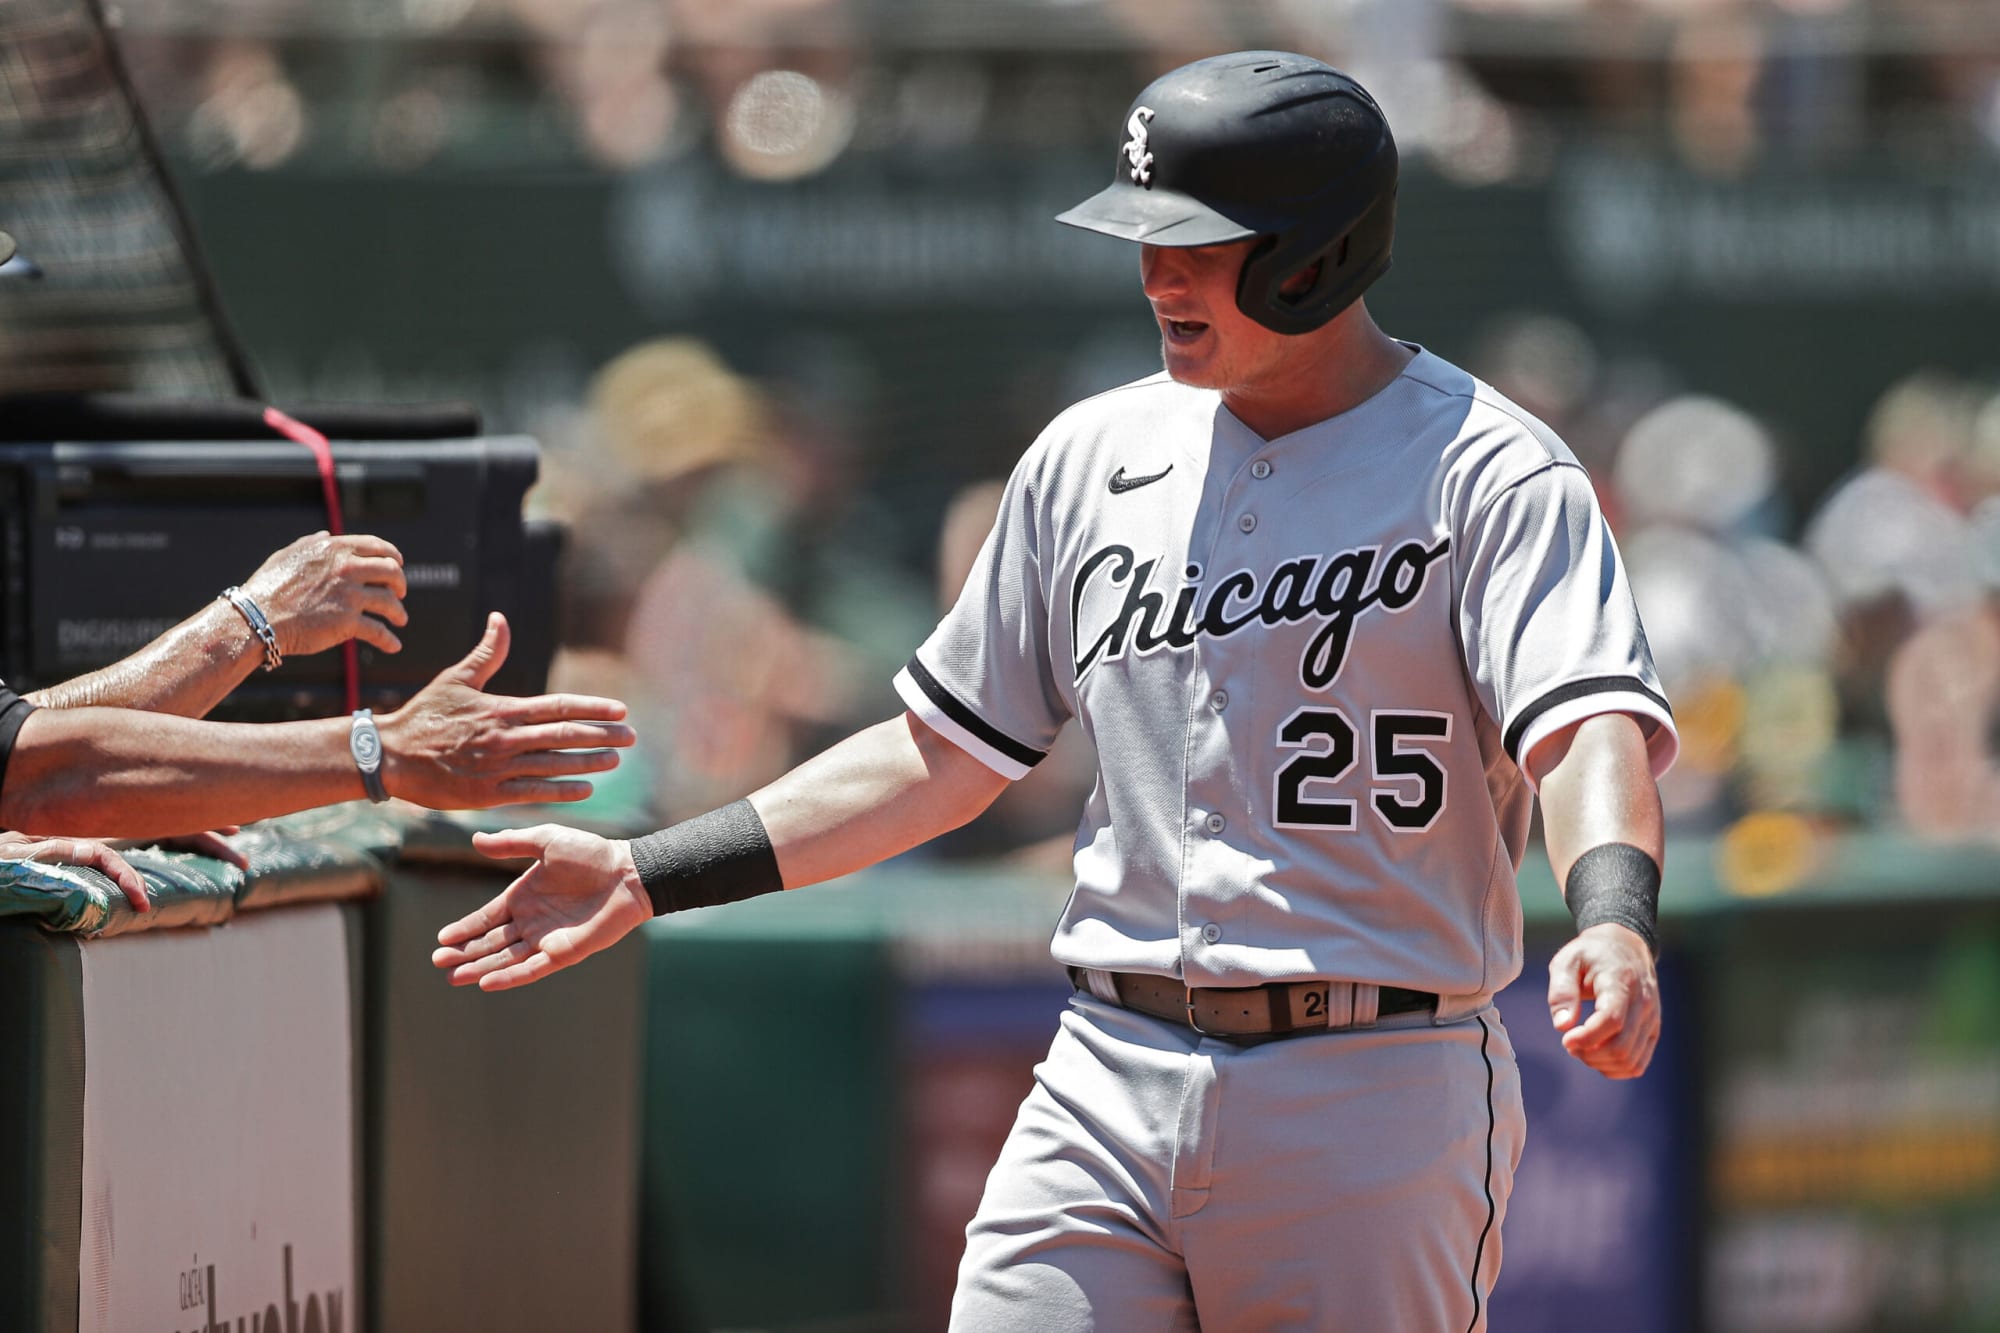 Cal Baseball: Andrew Vaughn's Big Moment With the White Sox May Be